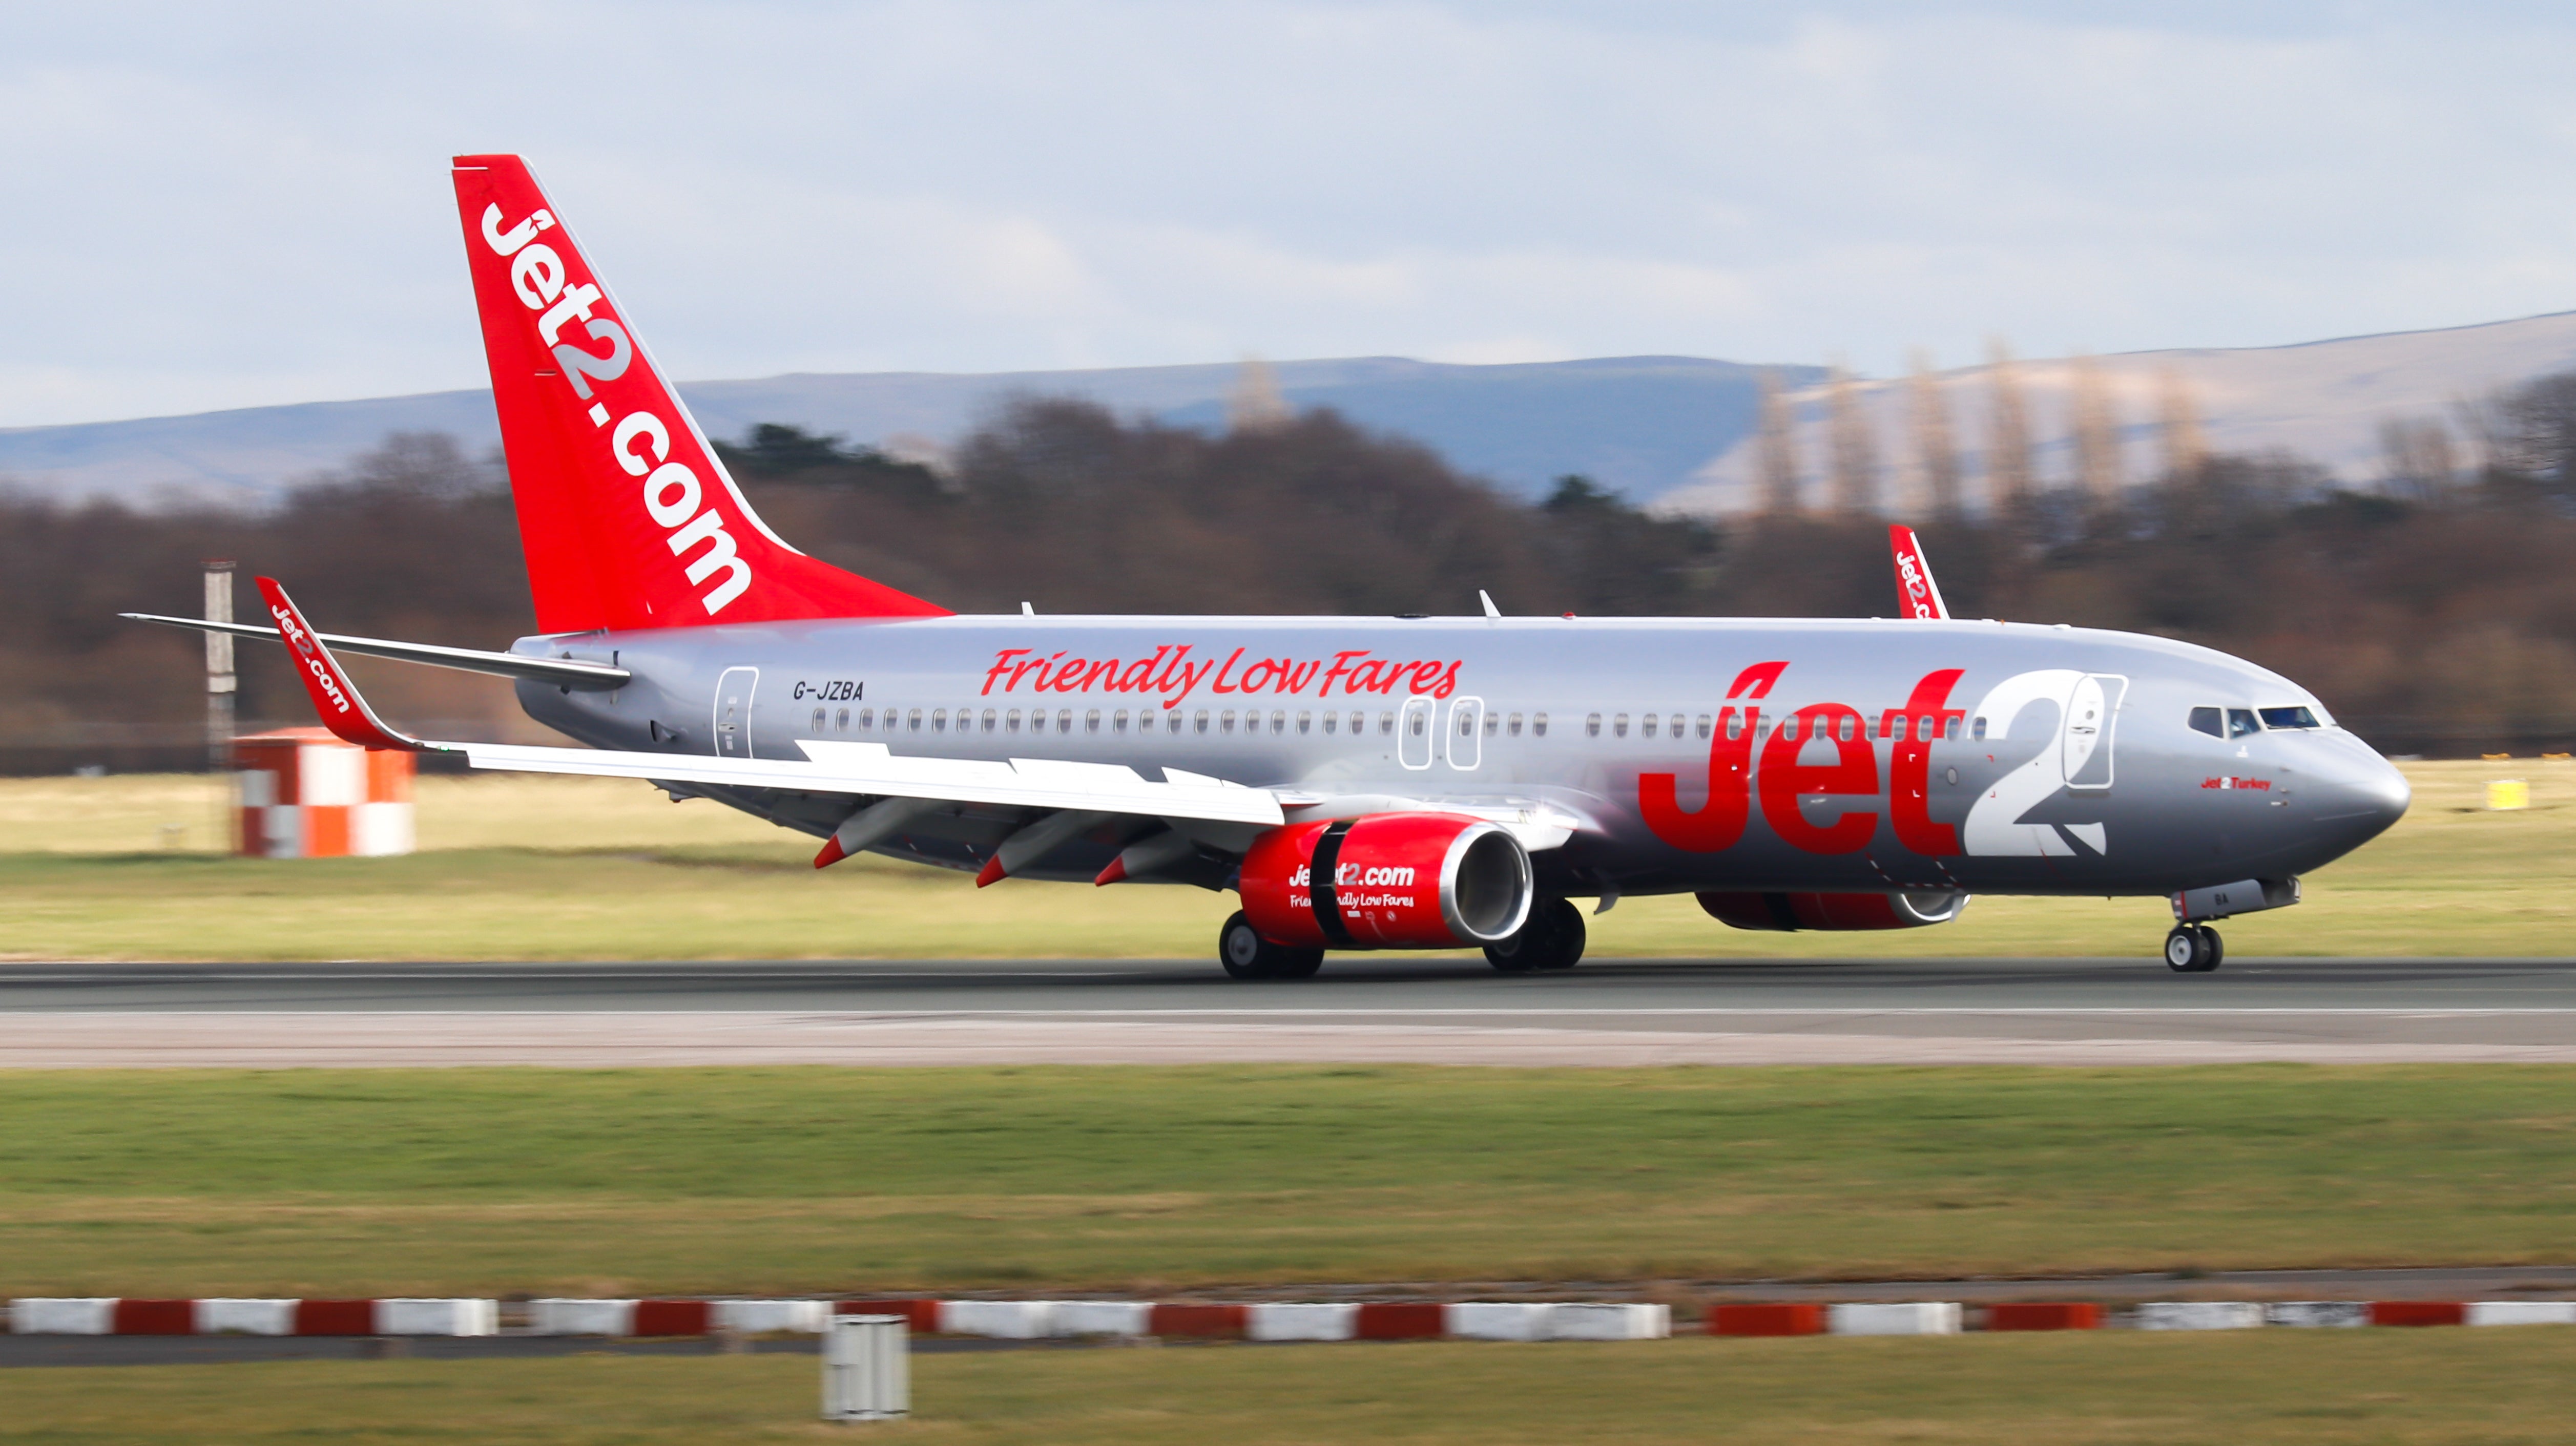 A Jet2 flight to Manchester Airport was forced to divert to Newquay in Cornwall after a medical emergency onboard